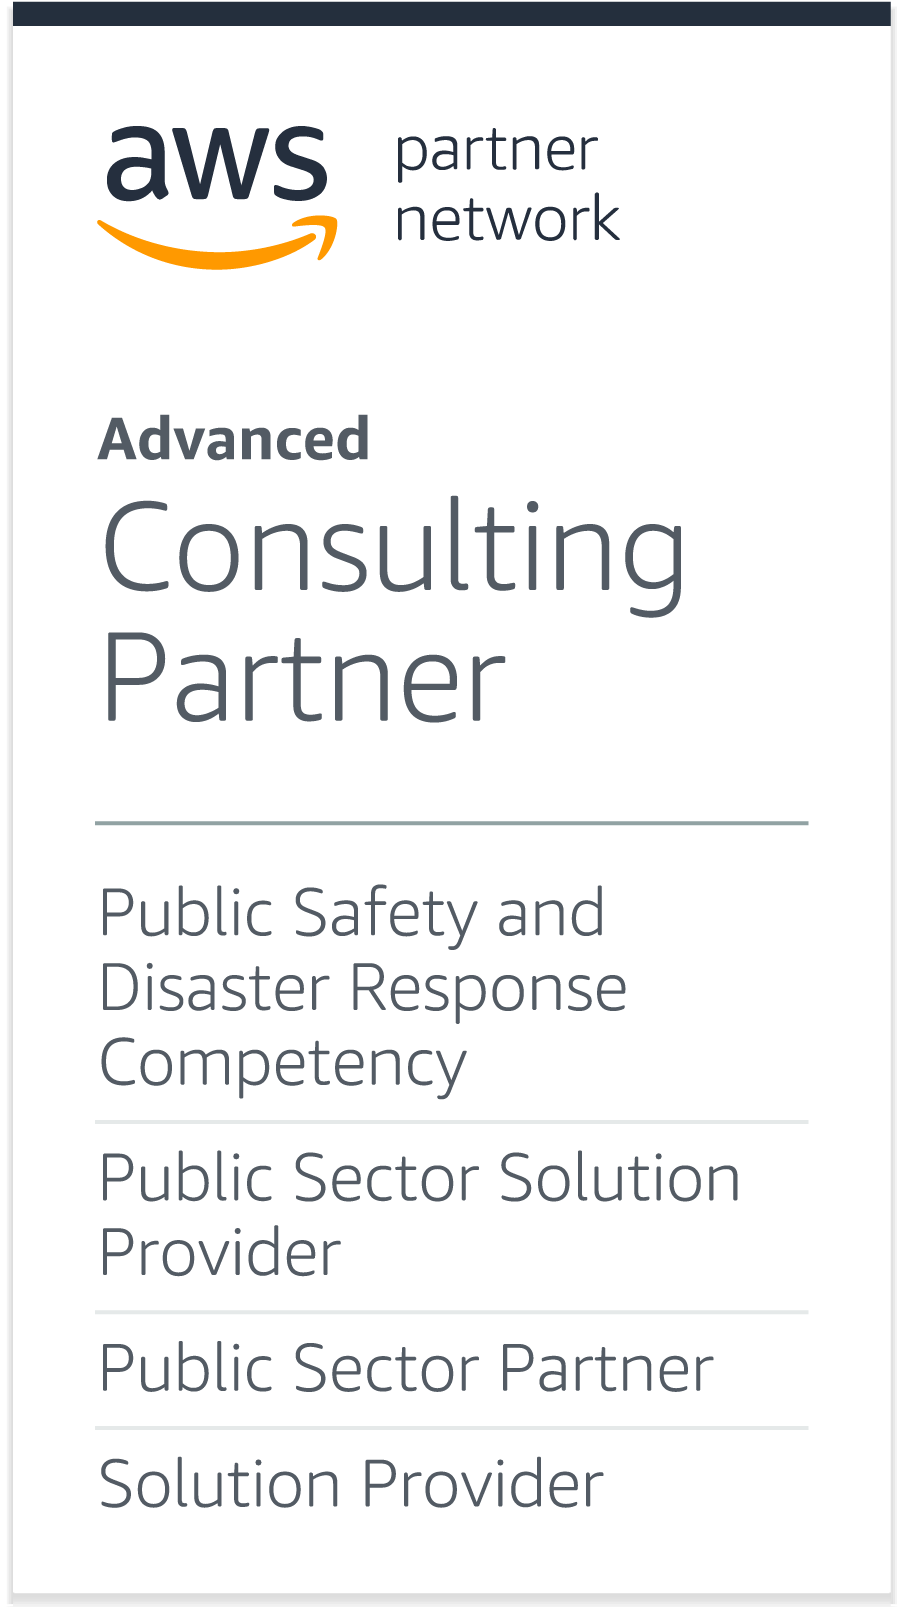 AWS Partner Network, Advanced Consulting Partner: Public Safety and Disaster Reponse Competency, Public Sector Solution Provider, Public Sector Partner, Solution Provider